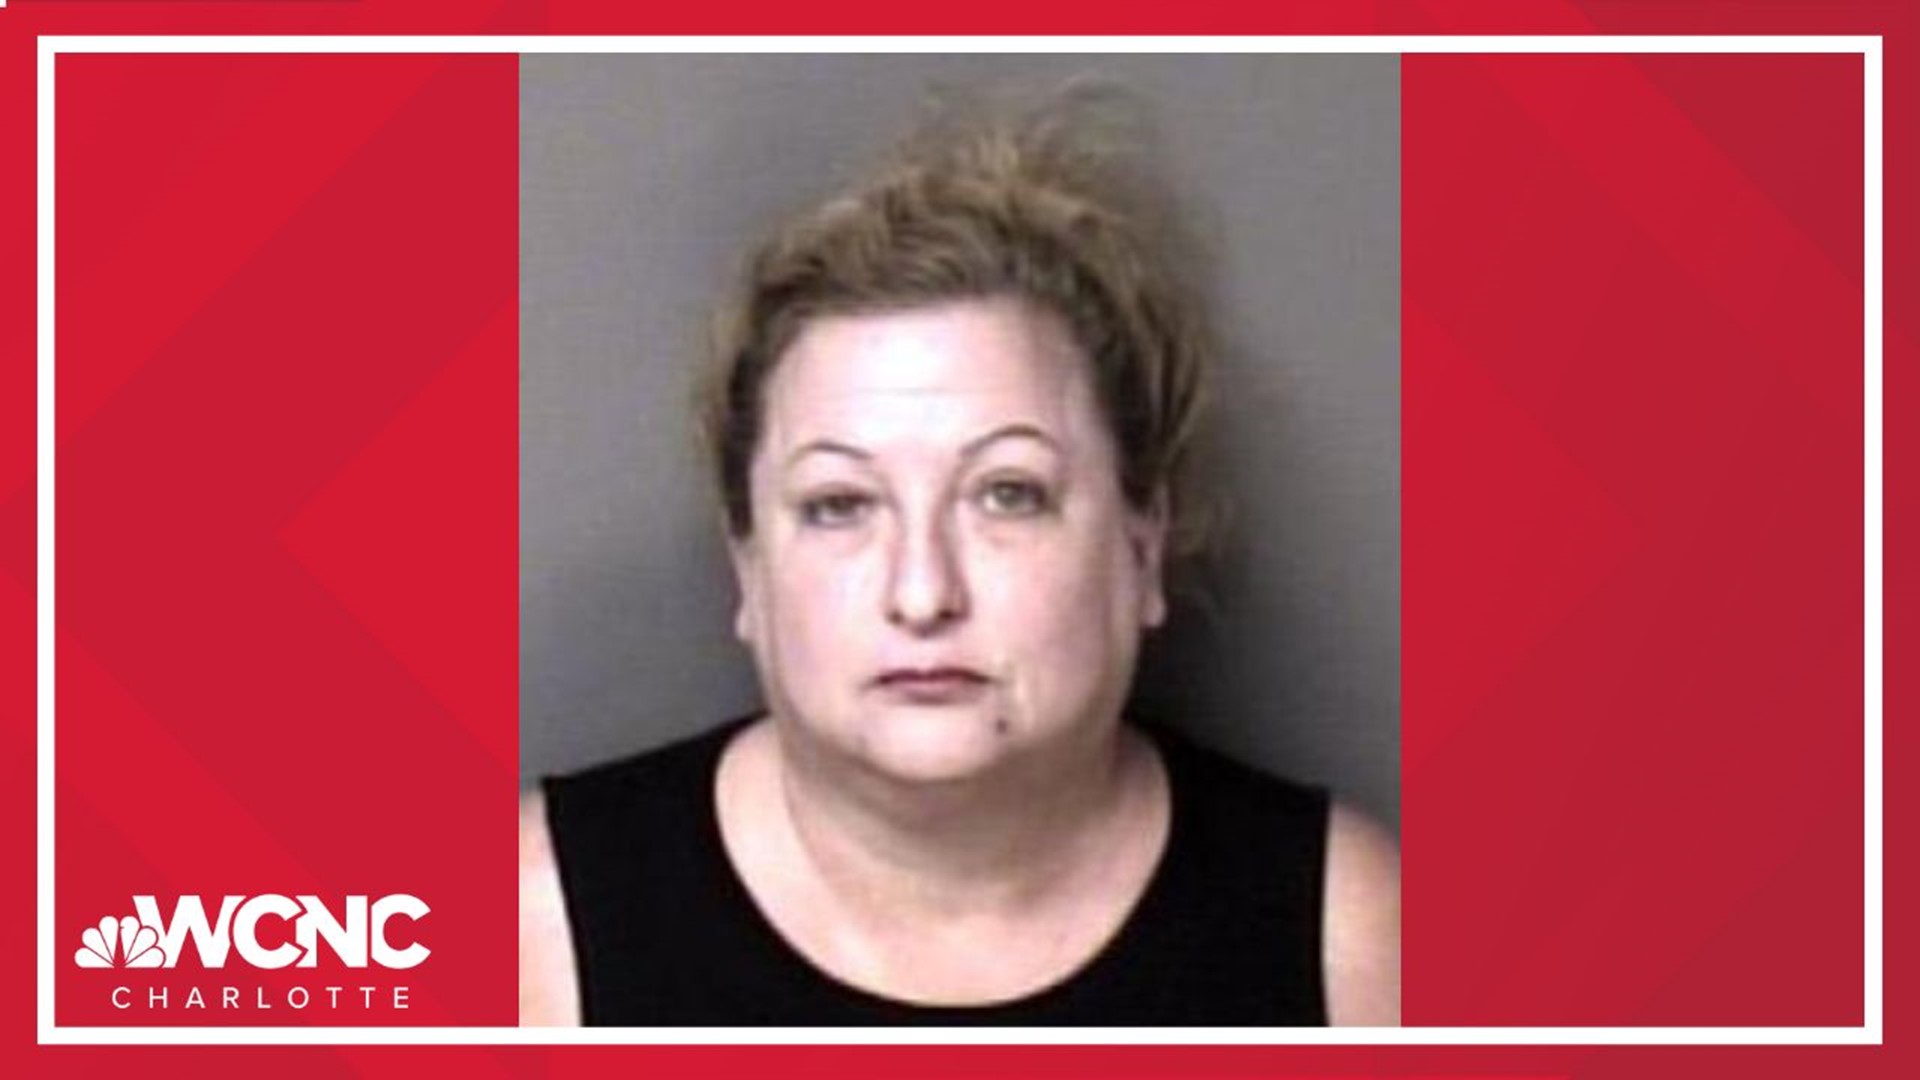 Lincoln County Commissioner Anita Branch McCall was charged with DWI in Gaston County, arrest records show.